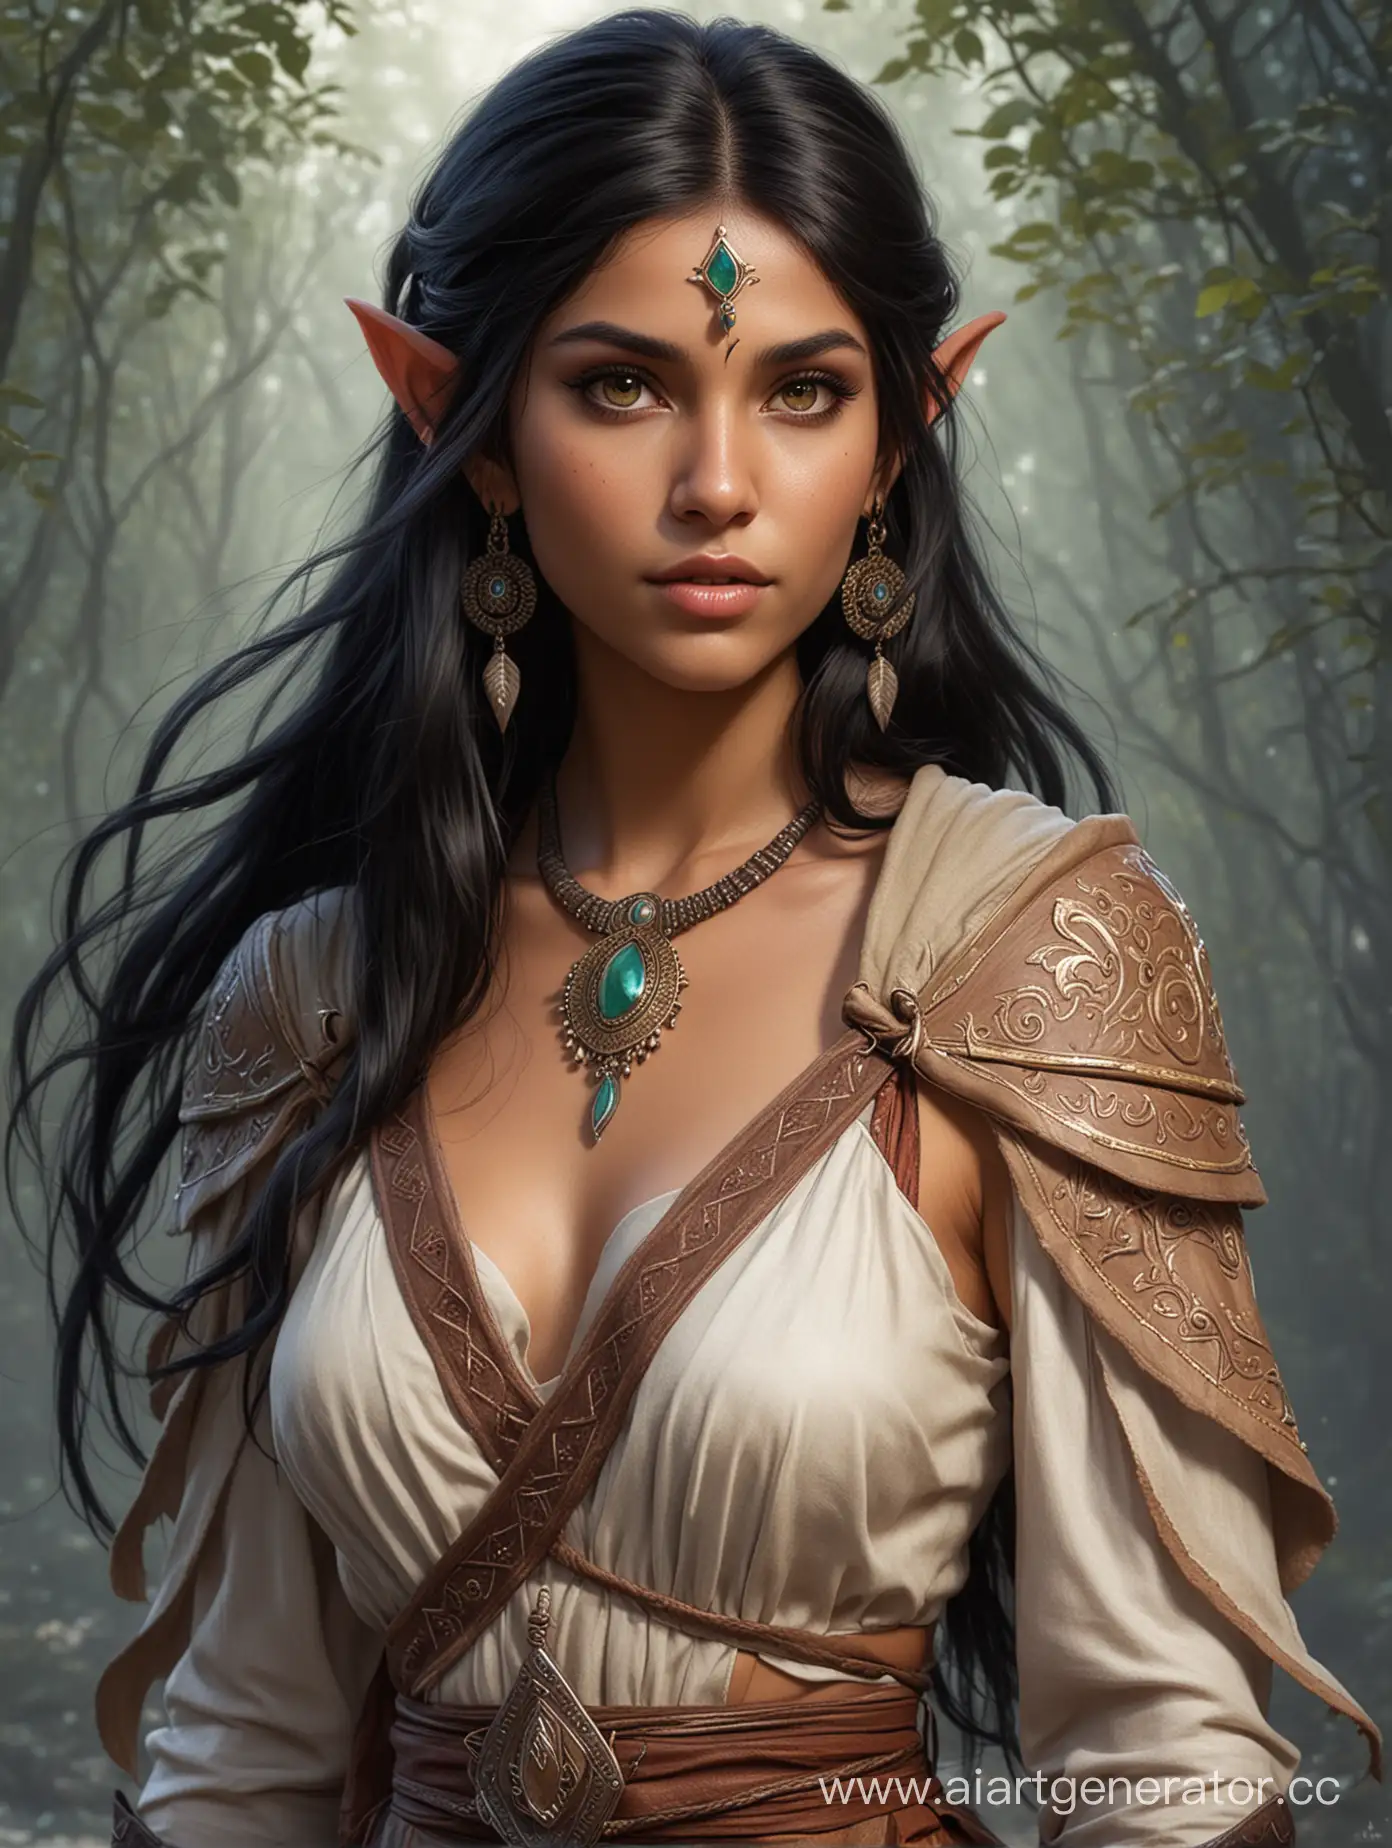 Mystical-Indian-Mage-with-Dark-Hair-Enigmatic-Portrait-of-an-Elf-Sorcerer